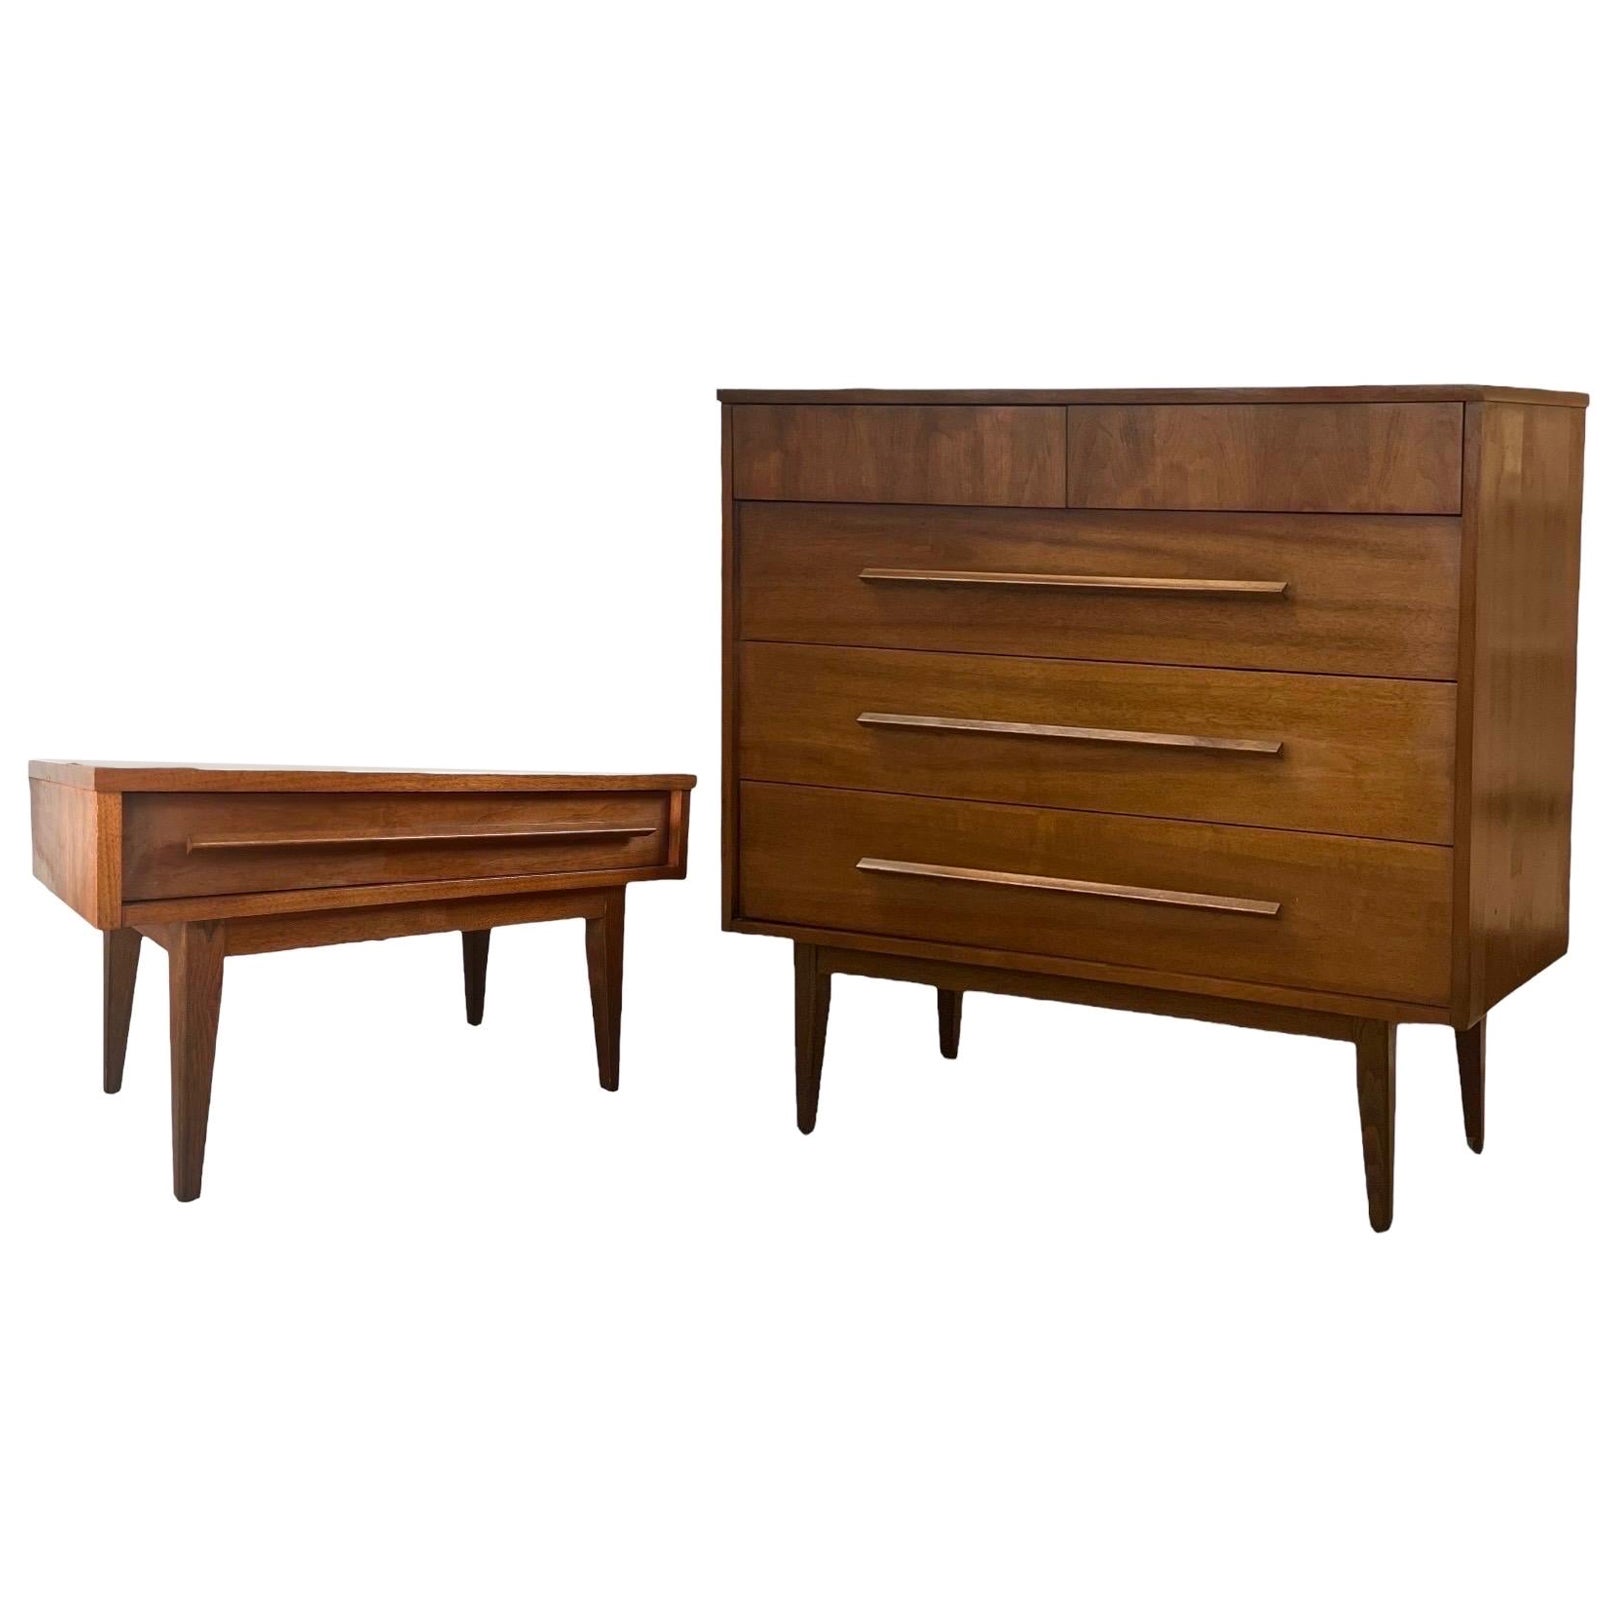 Vintage Mid Century Modern Cherry Wood Tallboy Dresser and End Table Set For Sale